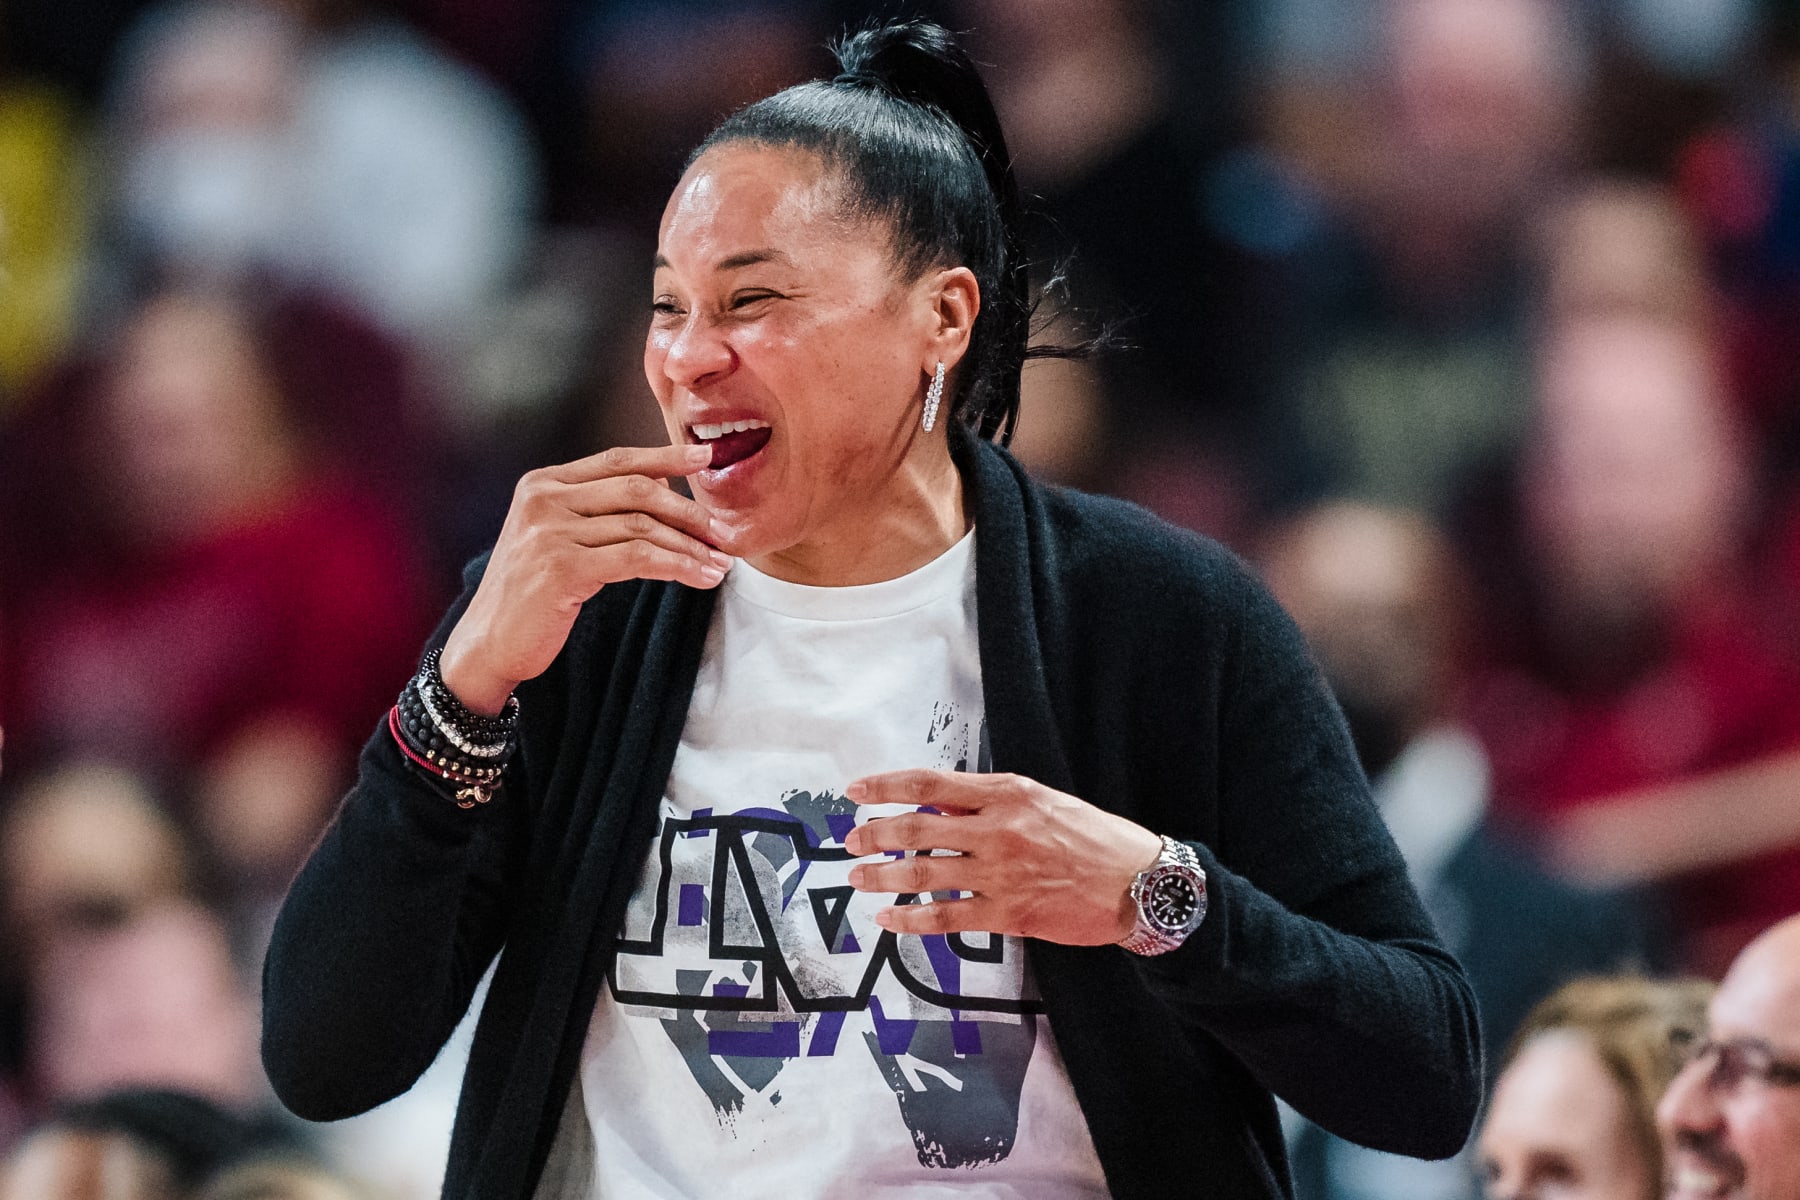 Dom Amore: South Carolina's Dawn Staley, UConn's Geno Auriemma both  Philly-made, reaching to conquer March Madness – Hartford Courant